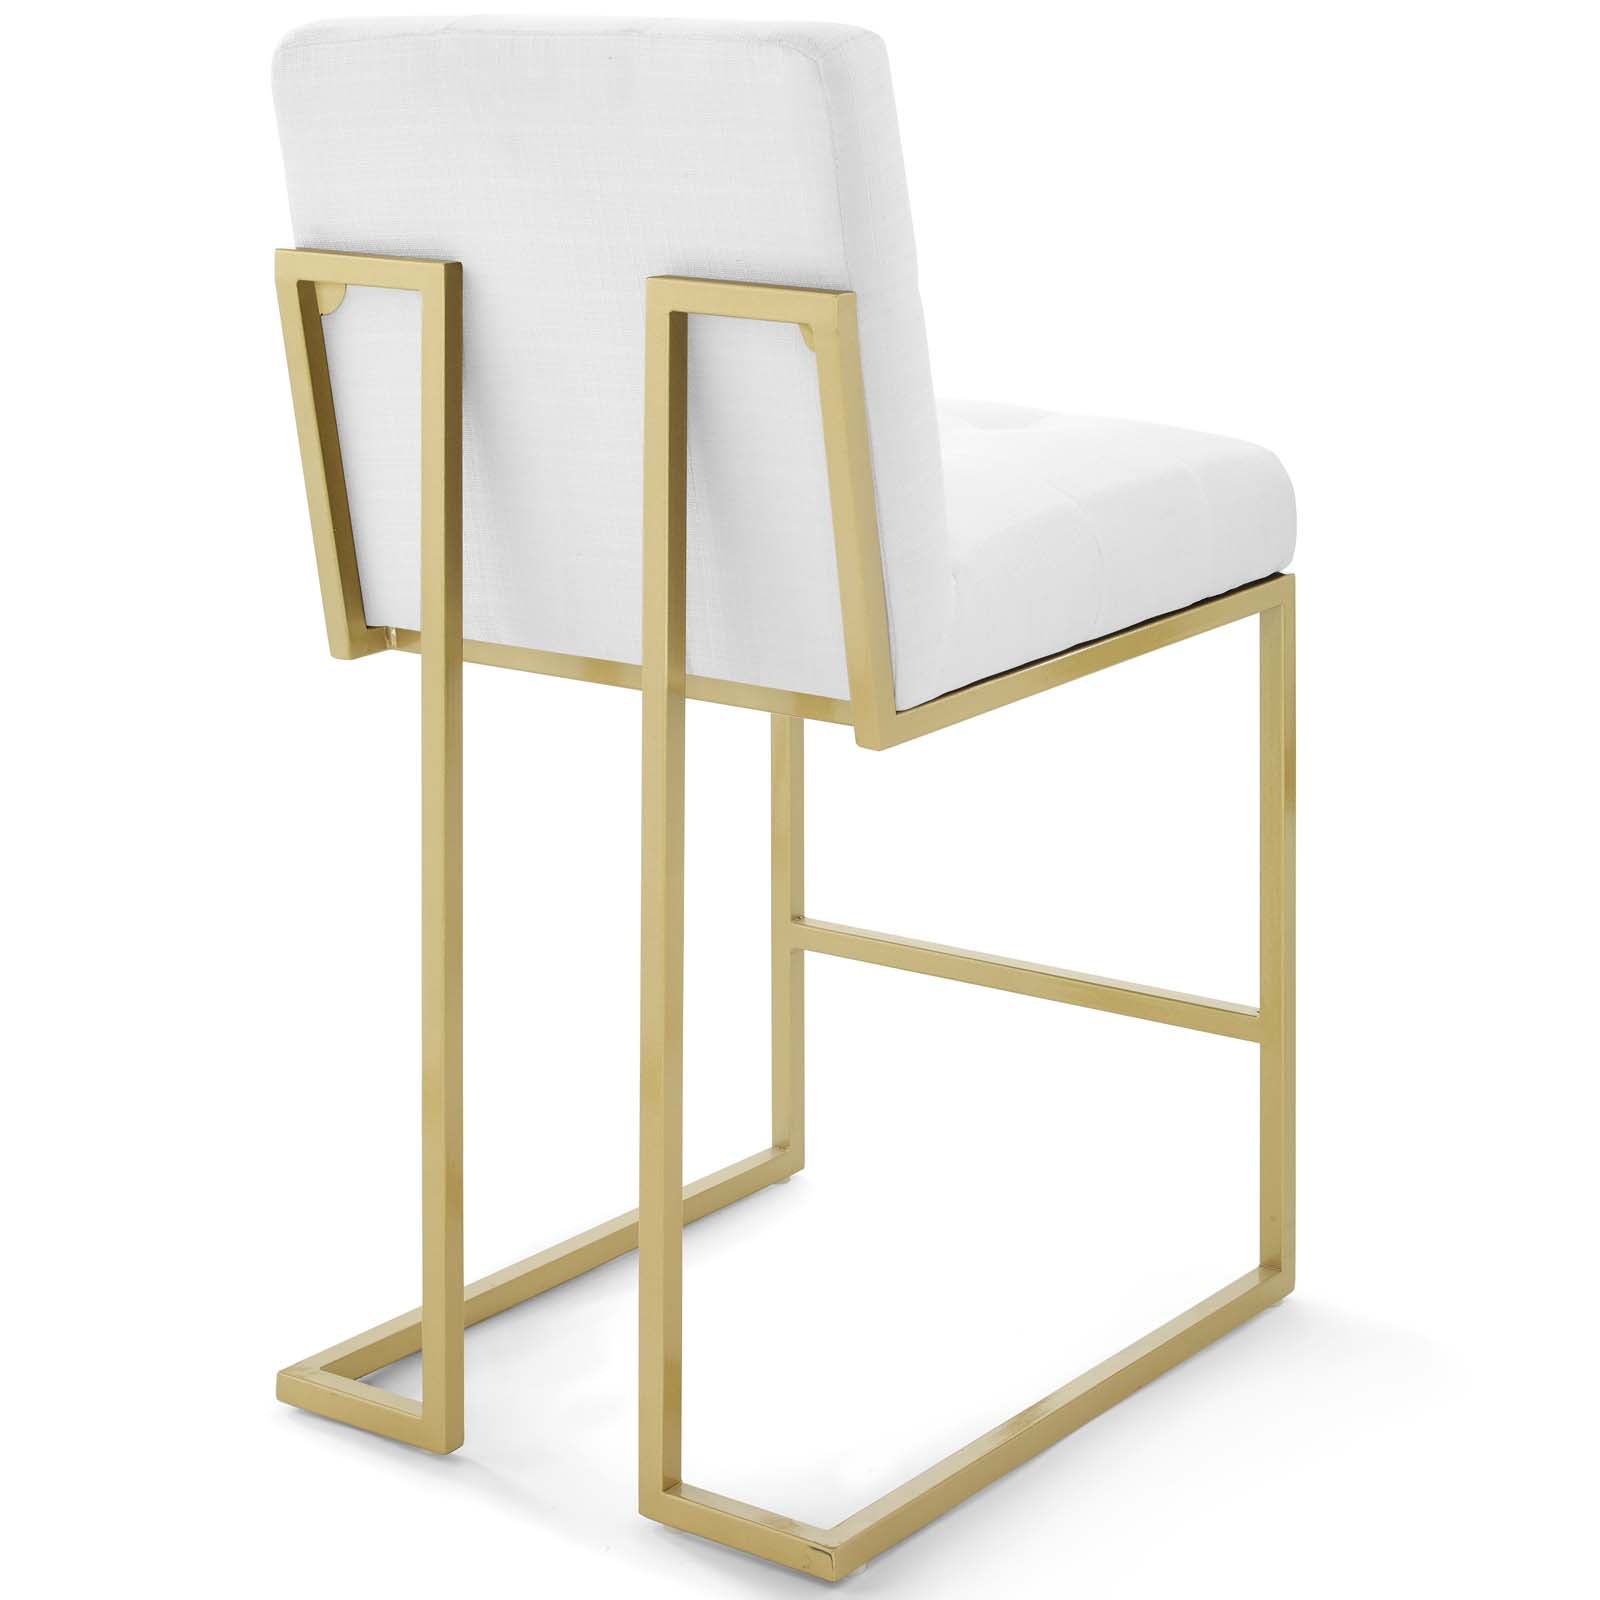 Modway Barstools - Privy Gold Stainless Steel Upholstered Fabric Counter Stool Set of 2 Gold White